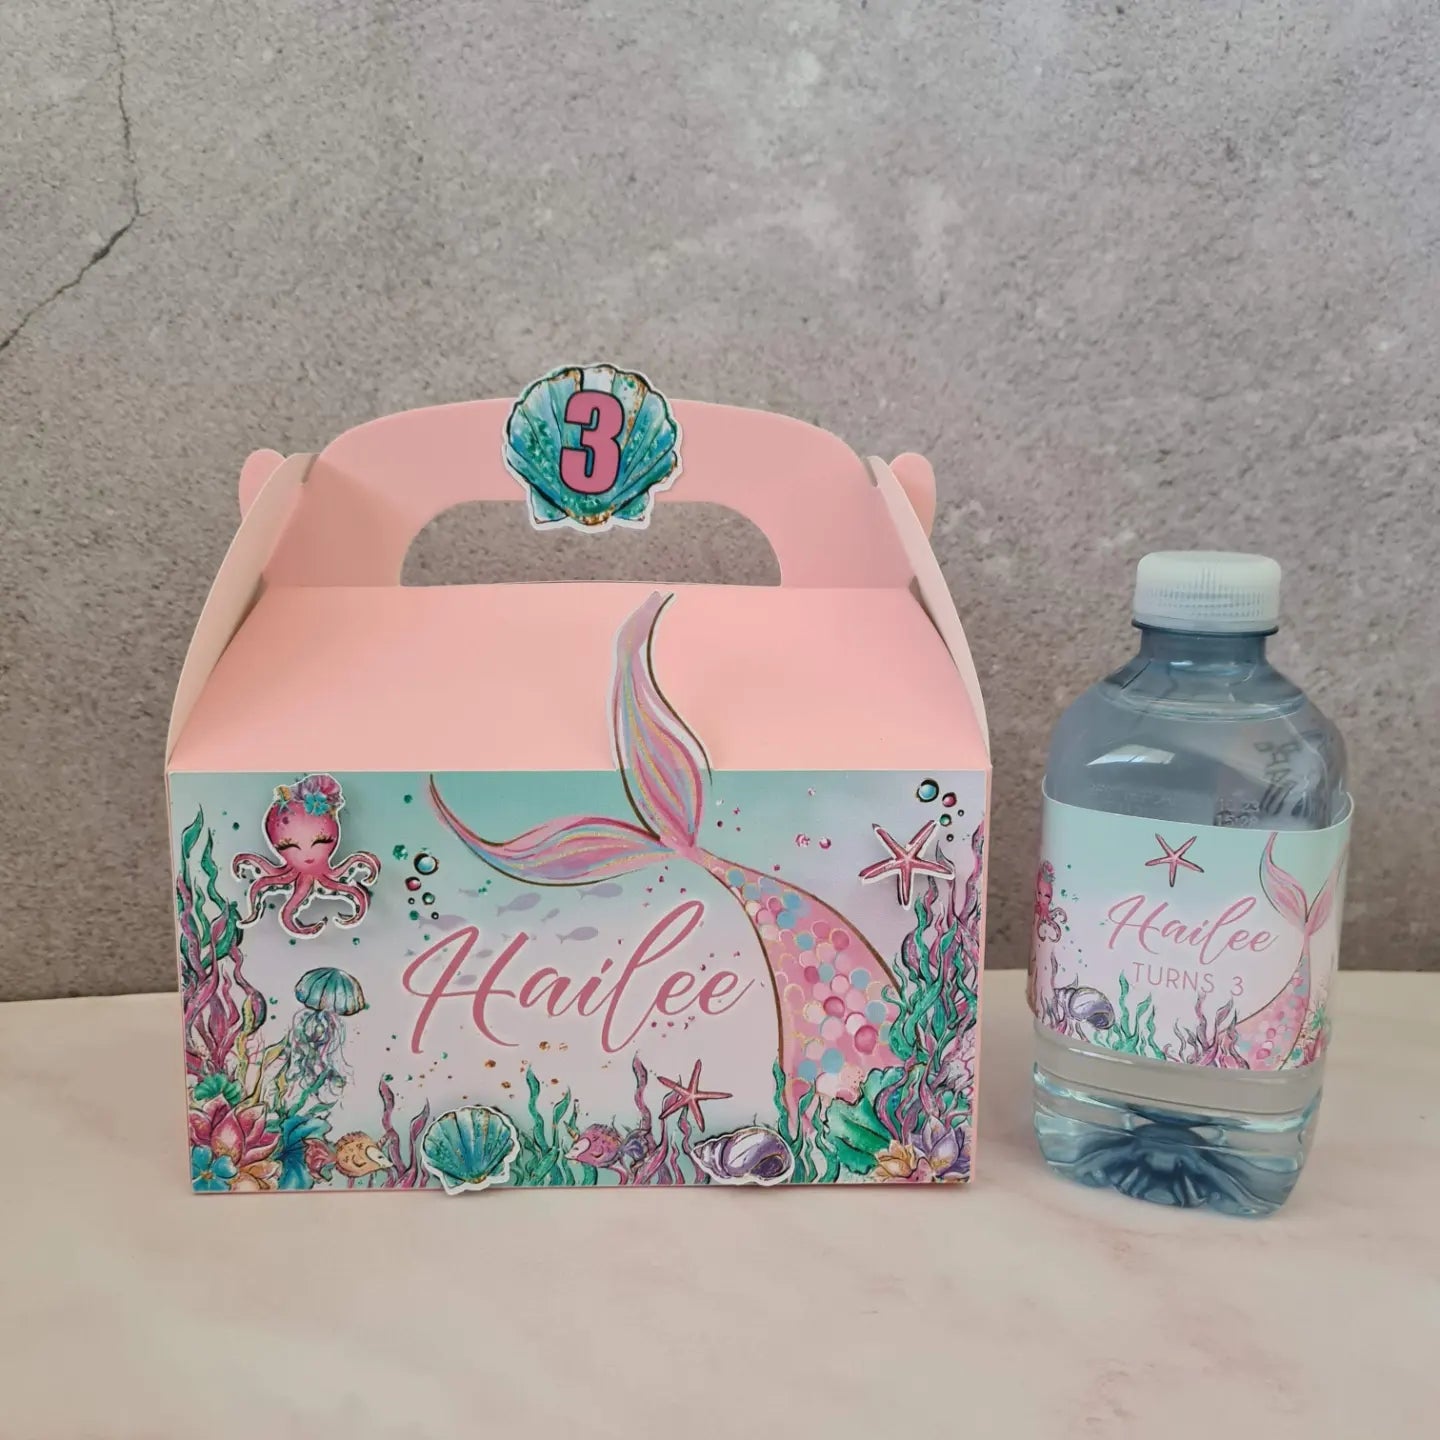 Pink Design Mermaid Tail Party Box